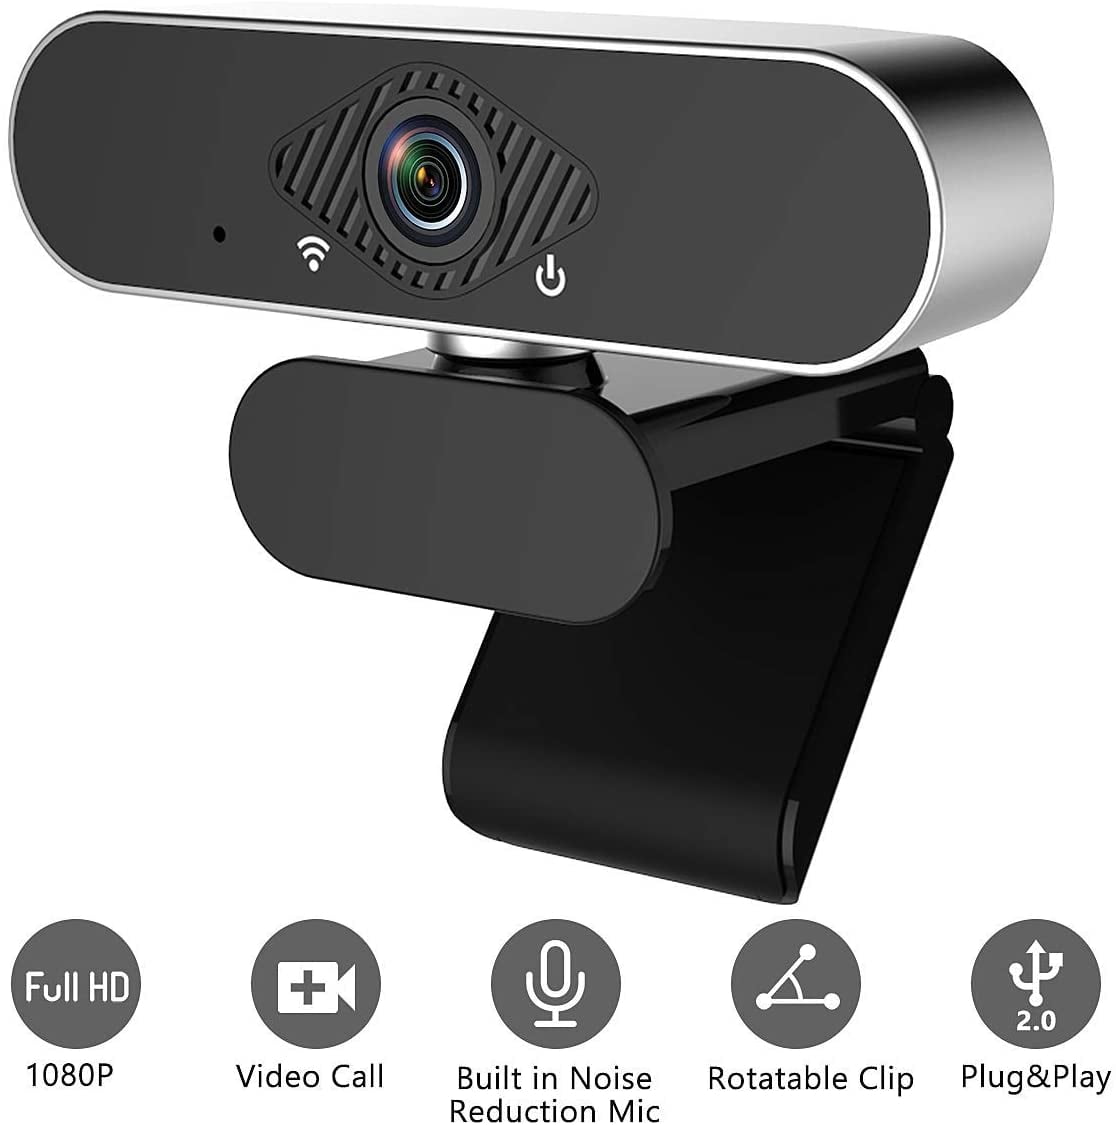 HD 1080P USB Web Camera Webcam with Microphone Plug and Play & 110-Degree Wide Angle View for Home Office/Online Work/Video Calling Streaming Webcam for Computer 